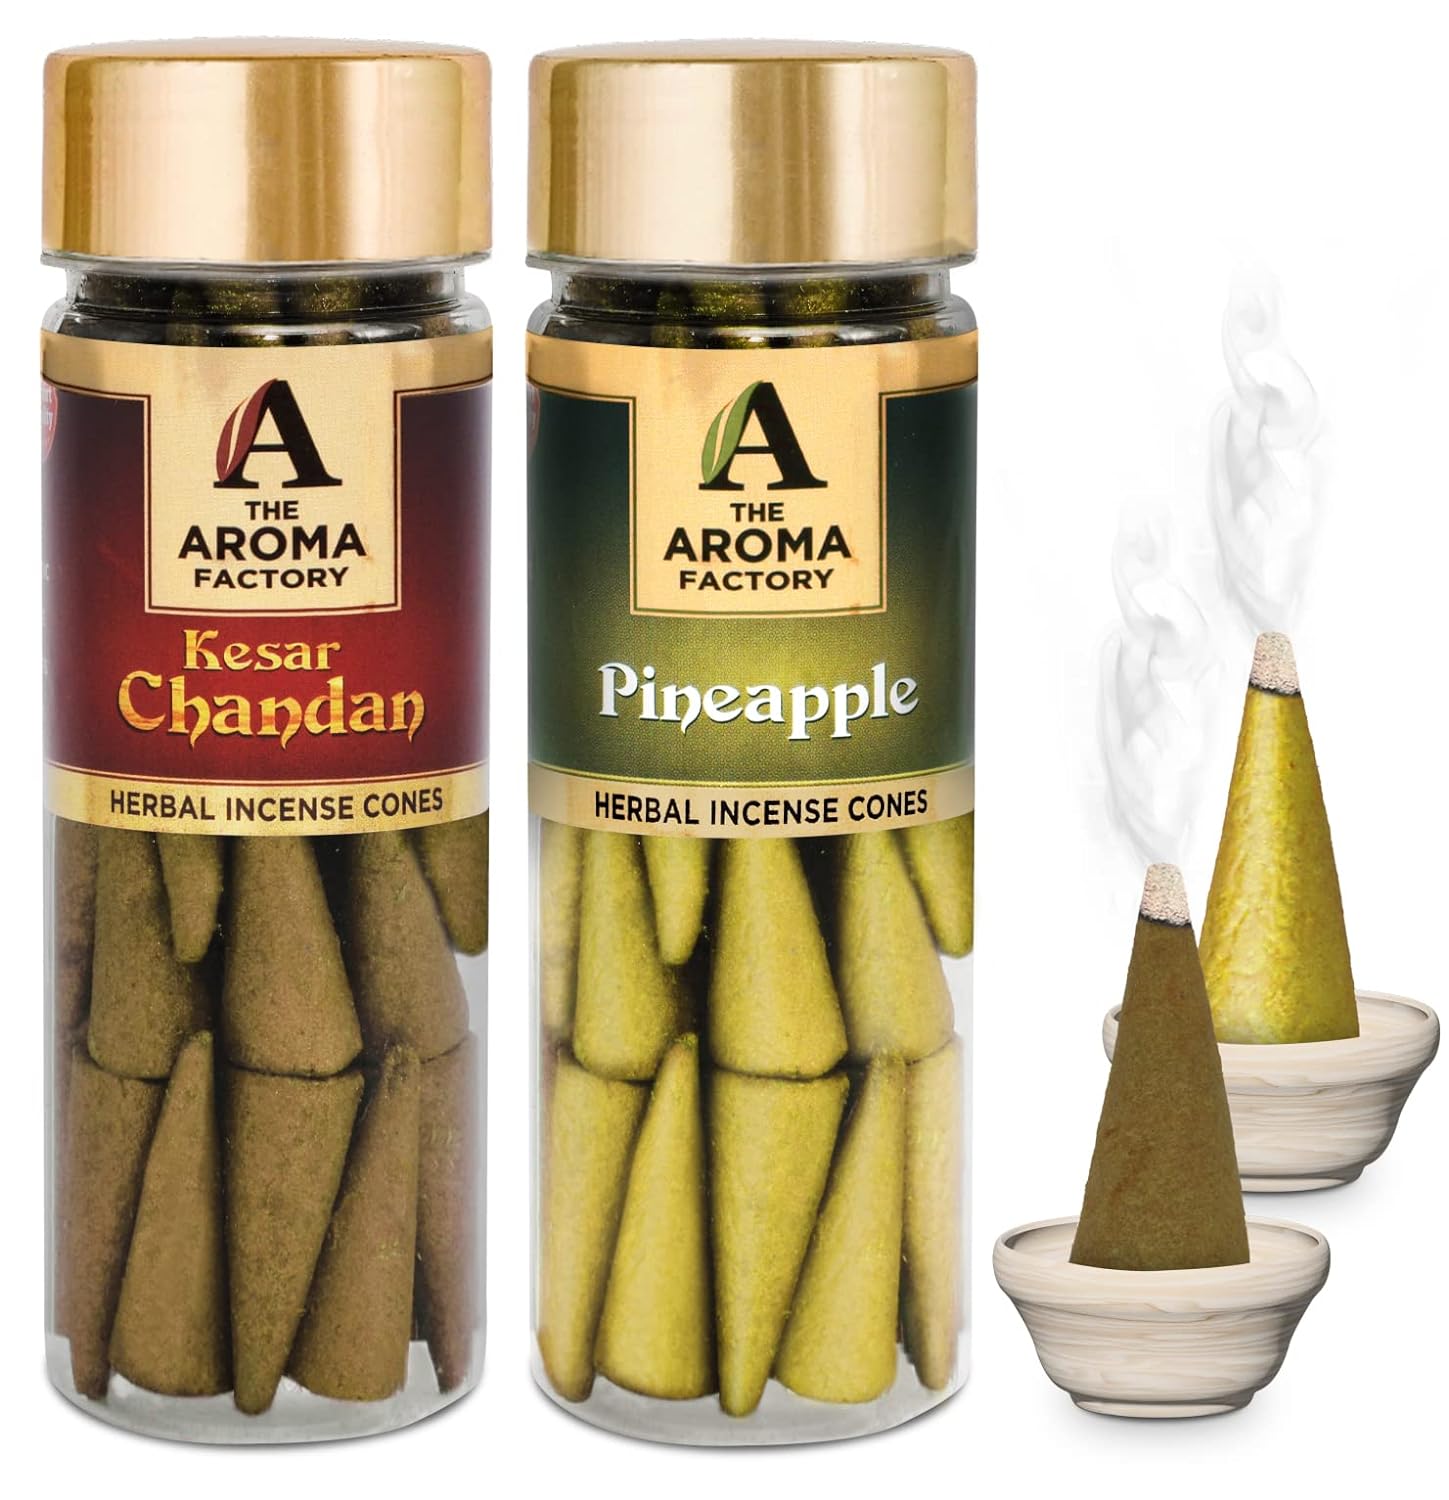 The Aroma Factory Incense Dhoop Cone for Pooja, Kesar Chandan & Pineapple (100% Herbal & 0% Charcoal) 2 Bottles x 30 Cones